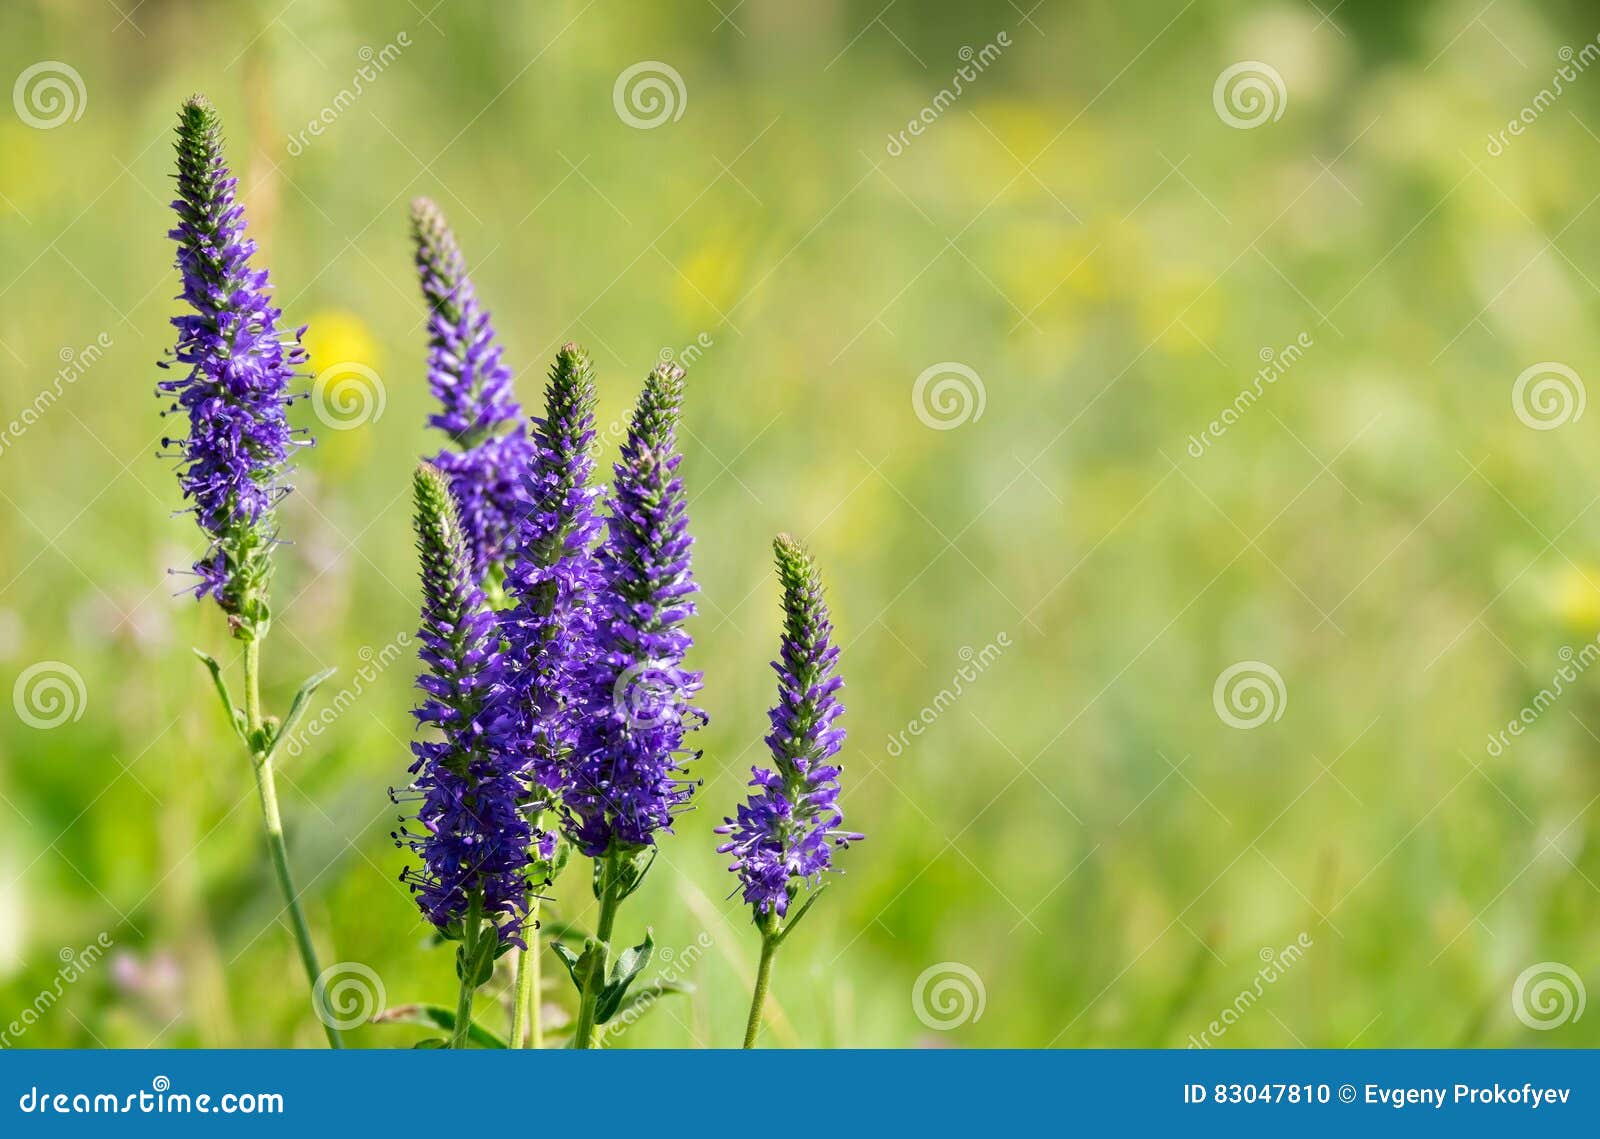 veronica spicata flowers on the meadow